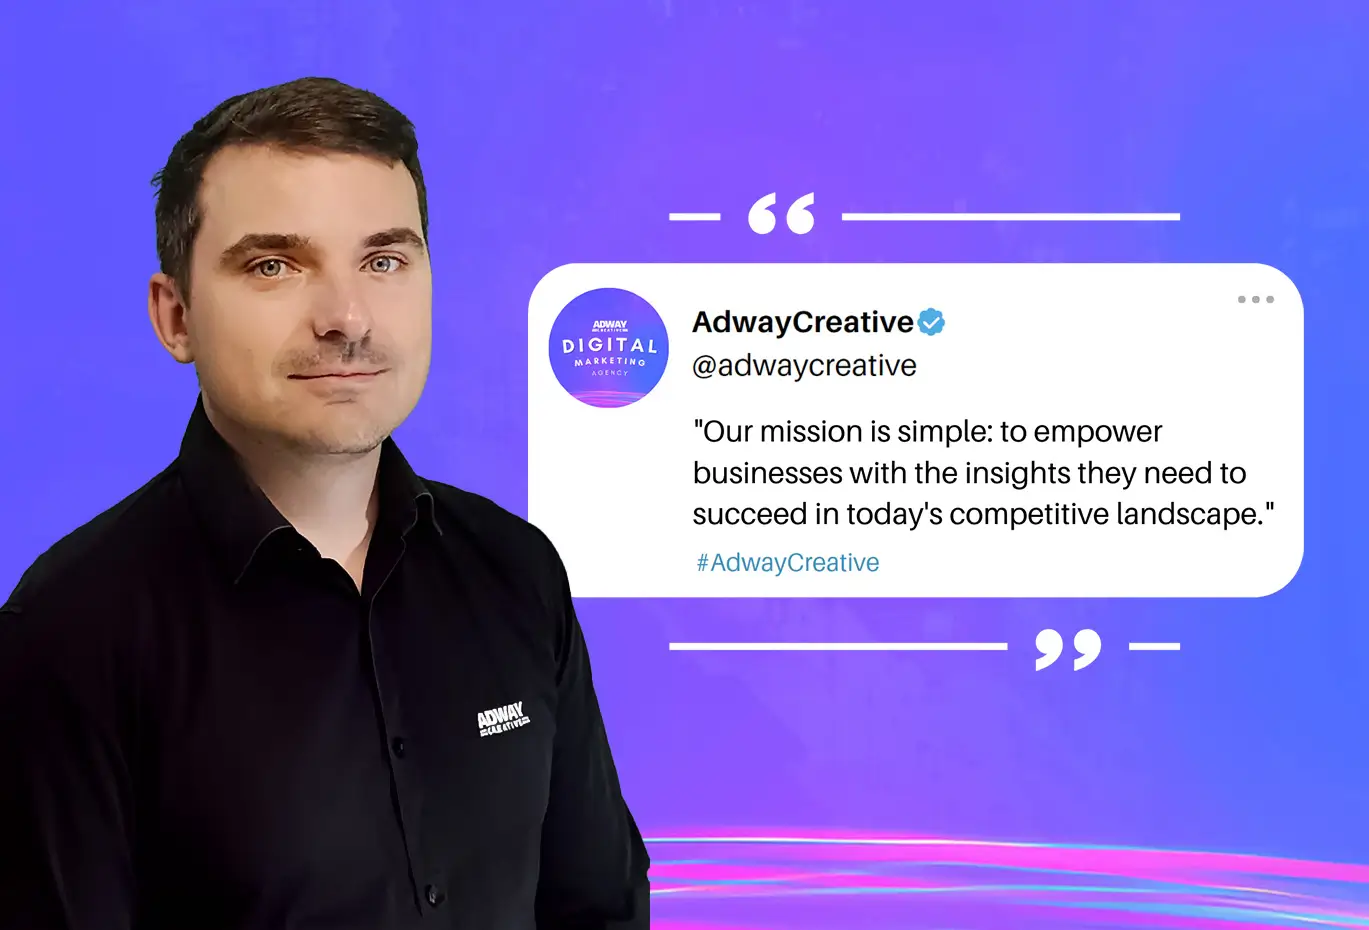 Iliya Avramov founder of AdwayCreative said Our mission is simple - to empower businesses with the insights they need to succeed in todays competitive landscape